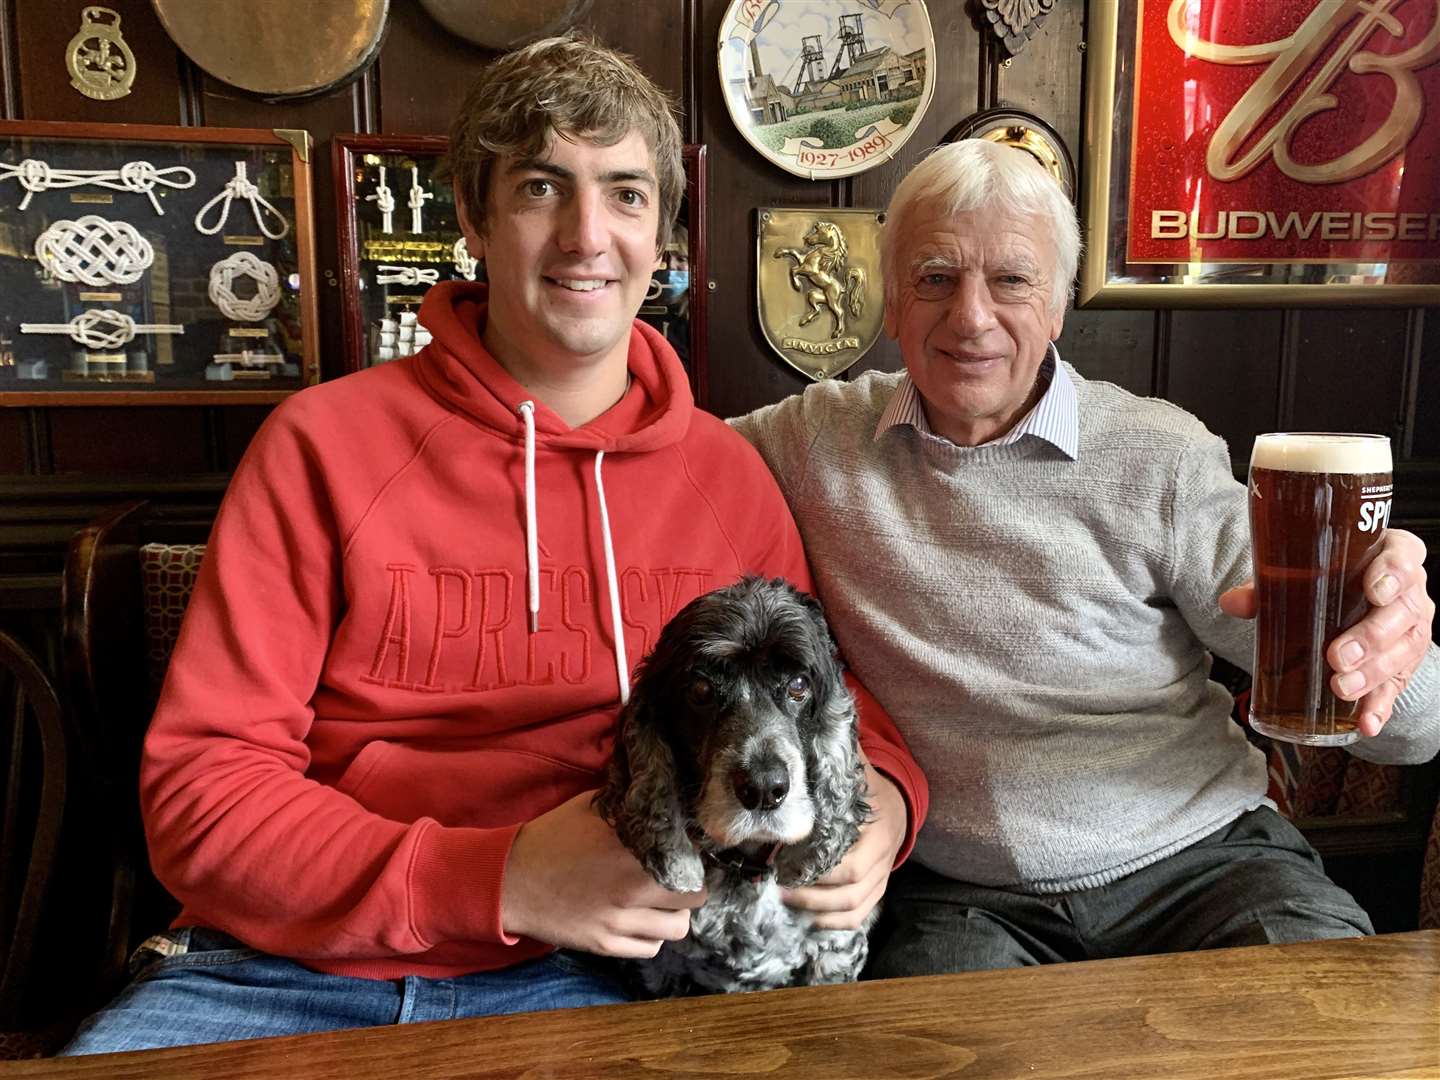 James Stiles is following in his father Graham Stiles's footsteps having taken over the Port Arms in Deal